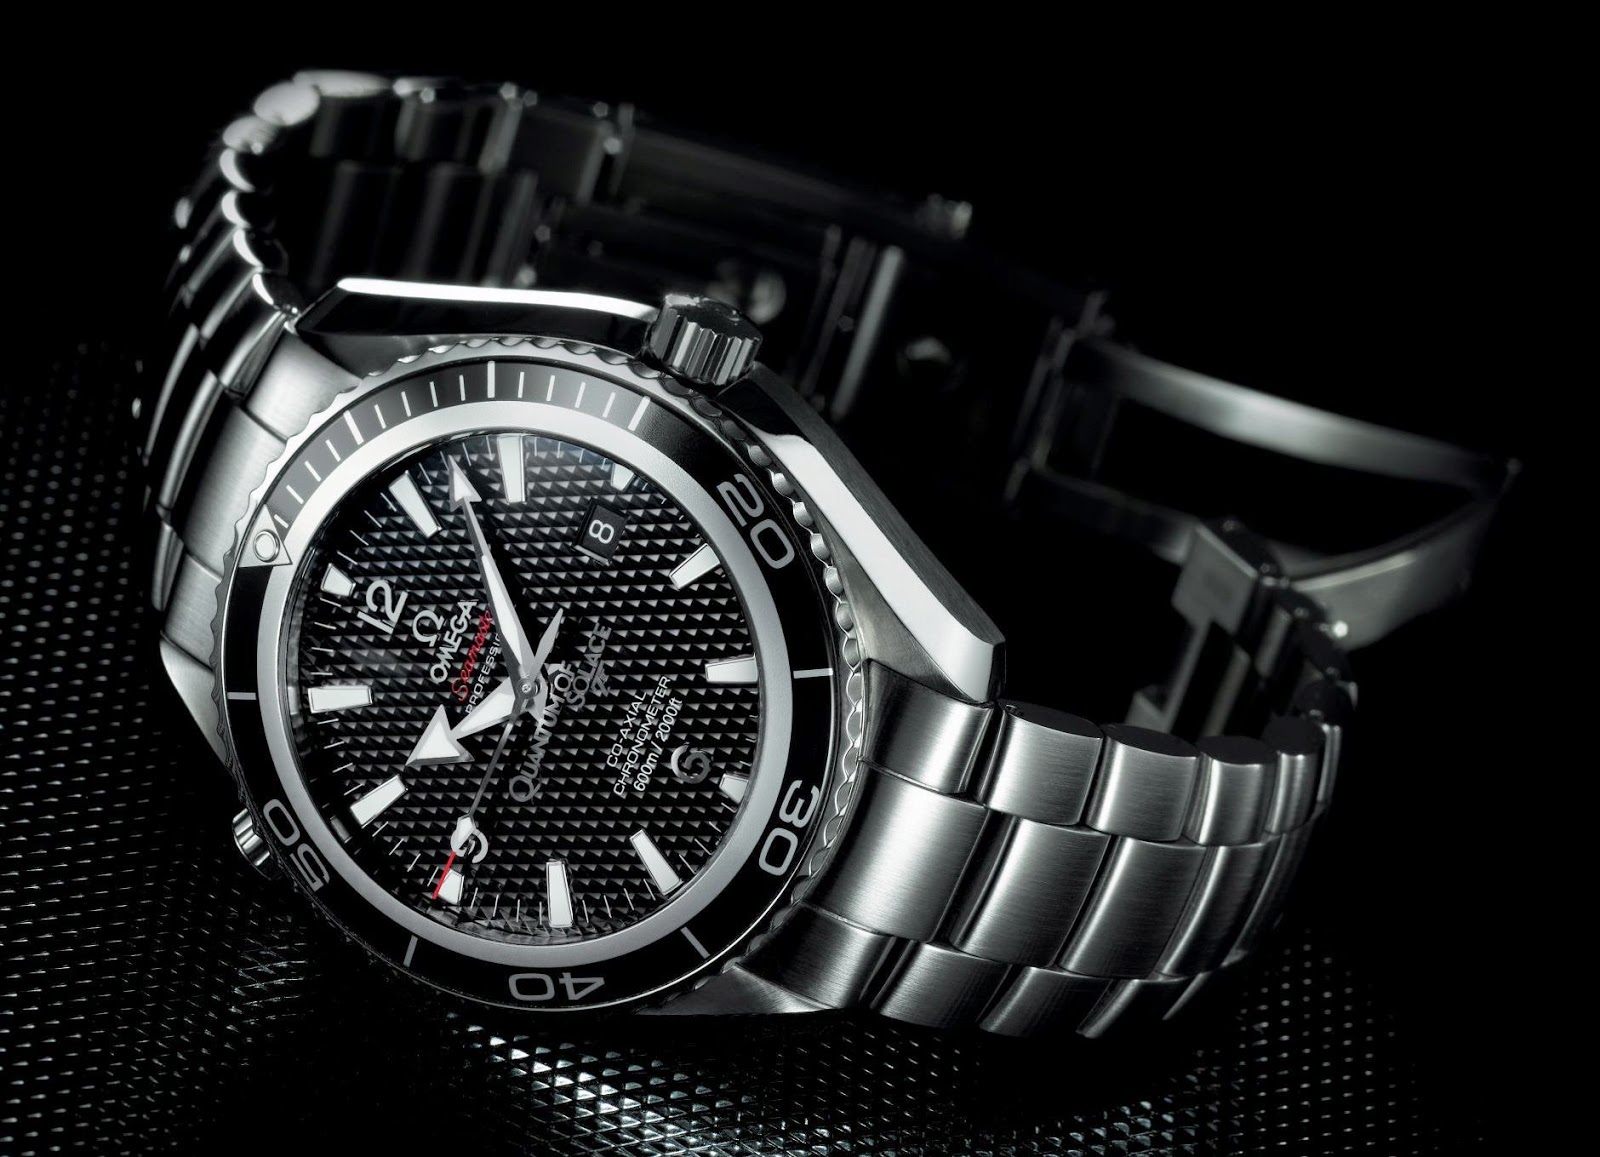 Omega Seamaster Planet Ocean 600m “quantum Of Solace” Limited Edition Watch